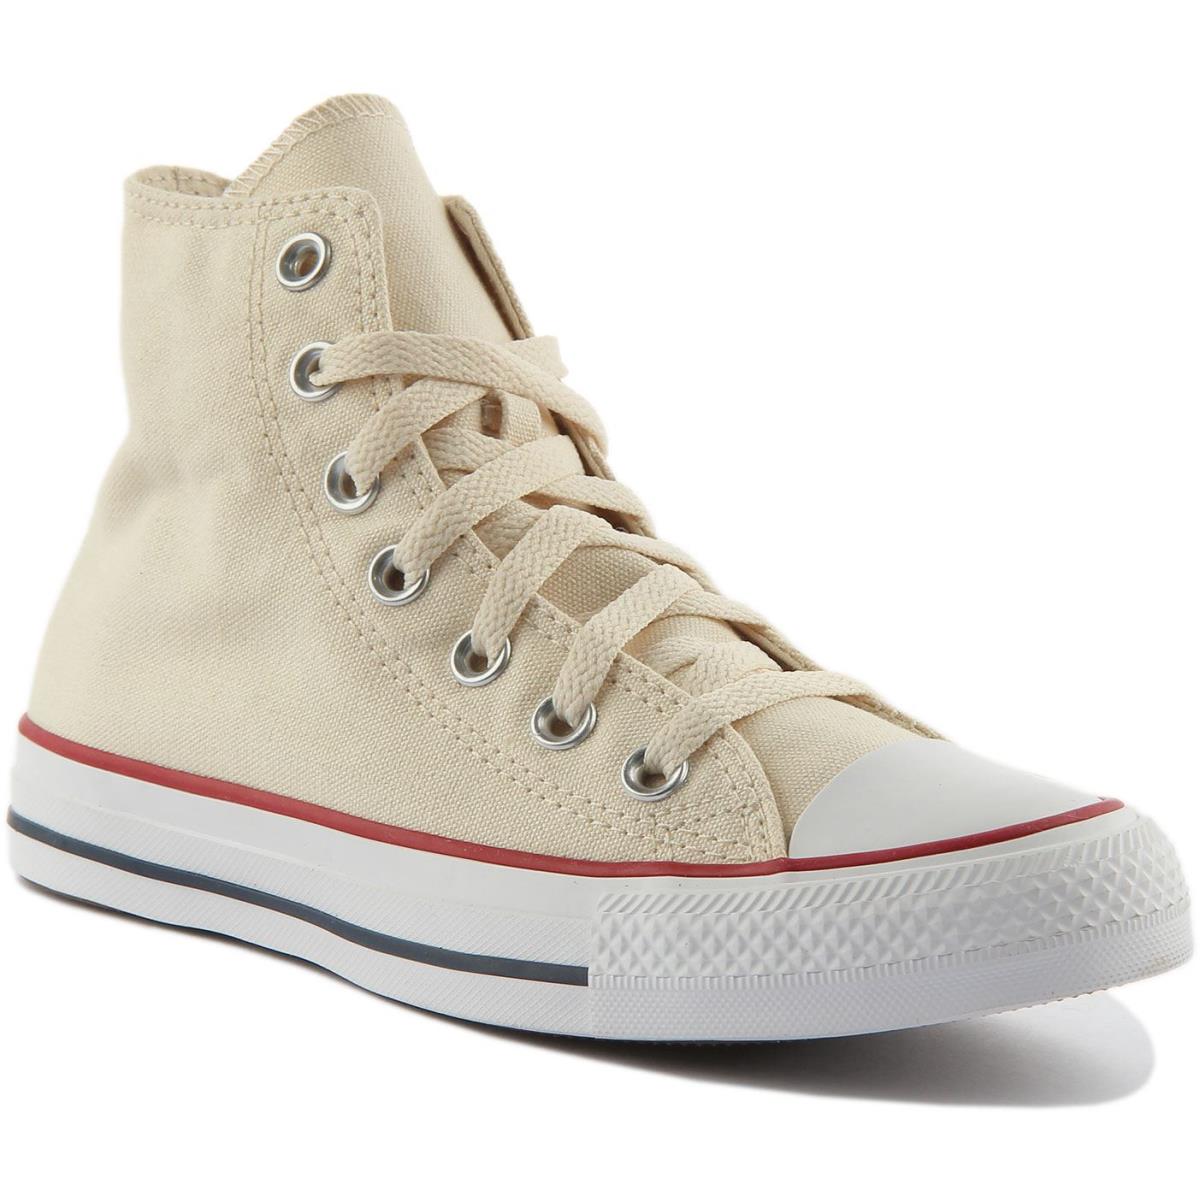 Converse 159484 Ct As Hi Unisex Canvas Sneakers In Natural US Size 3 - 9 NATURAL